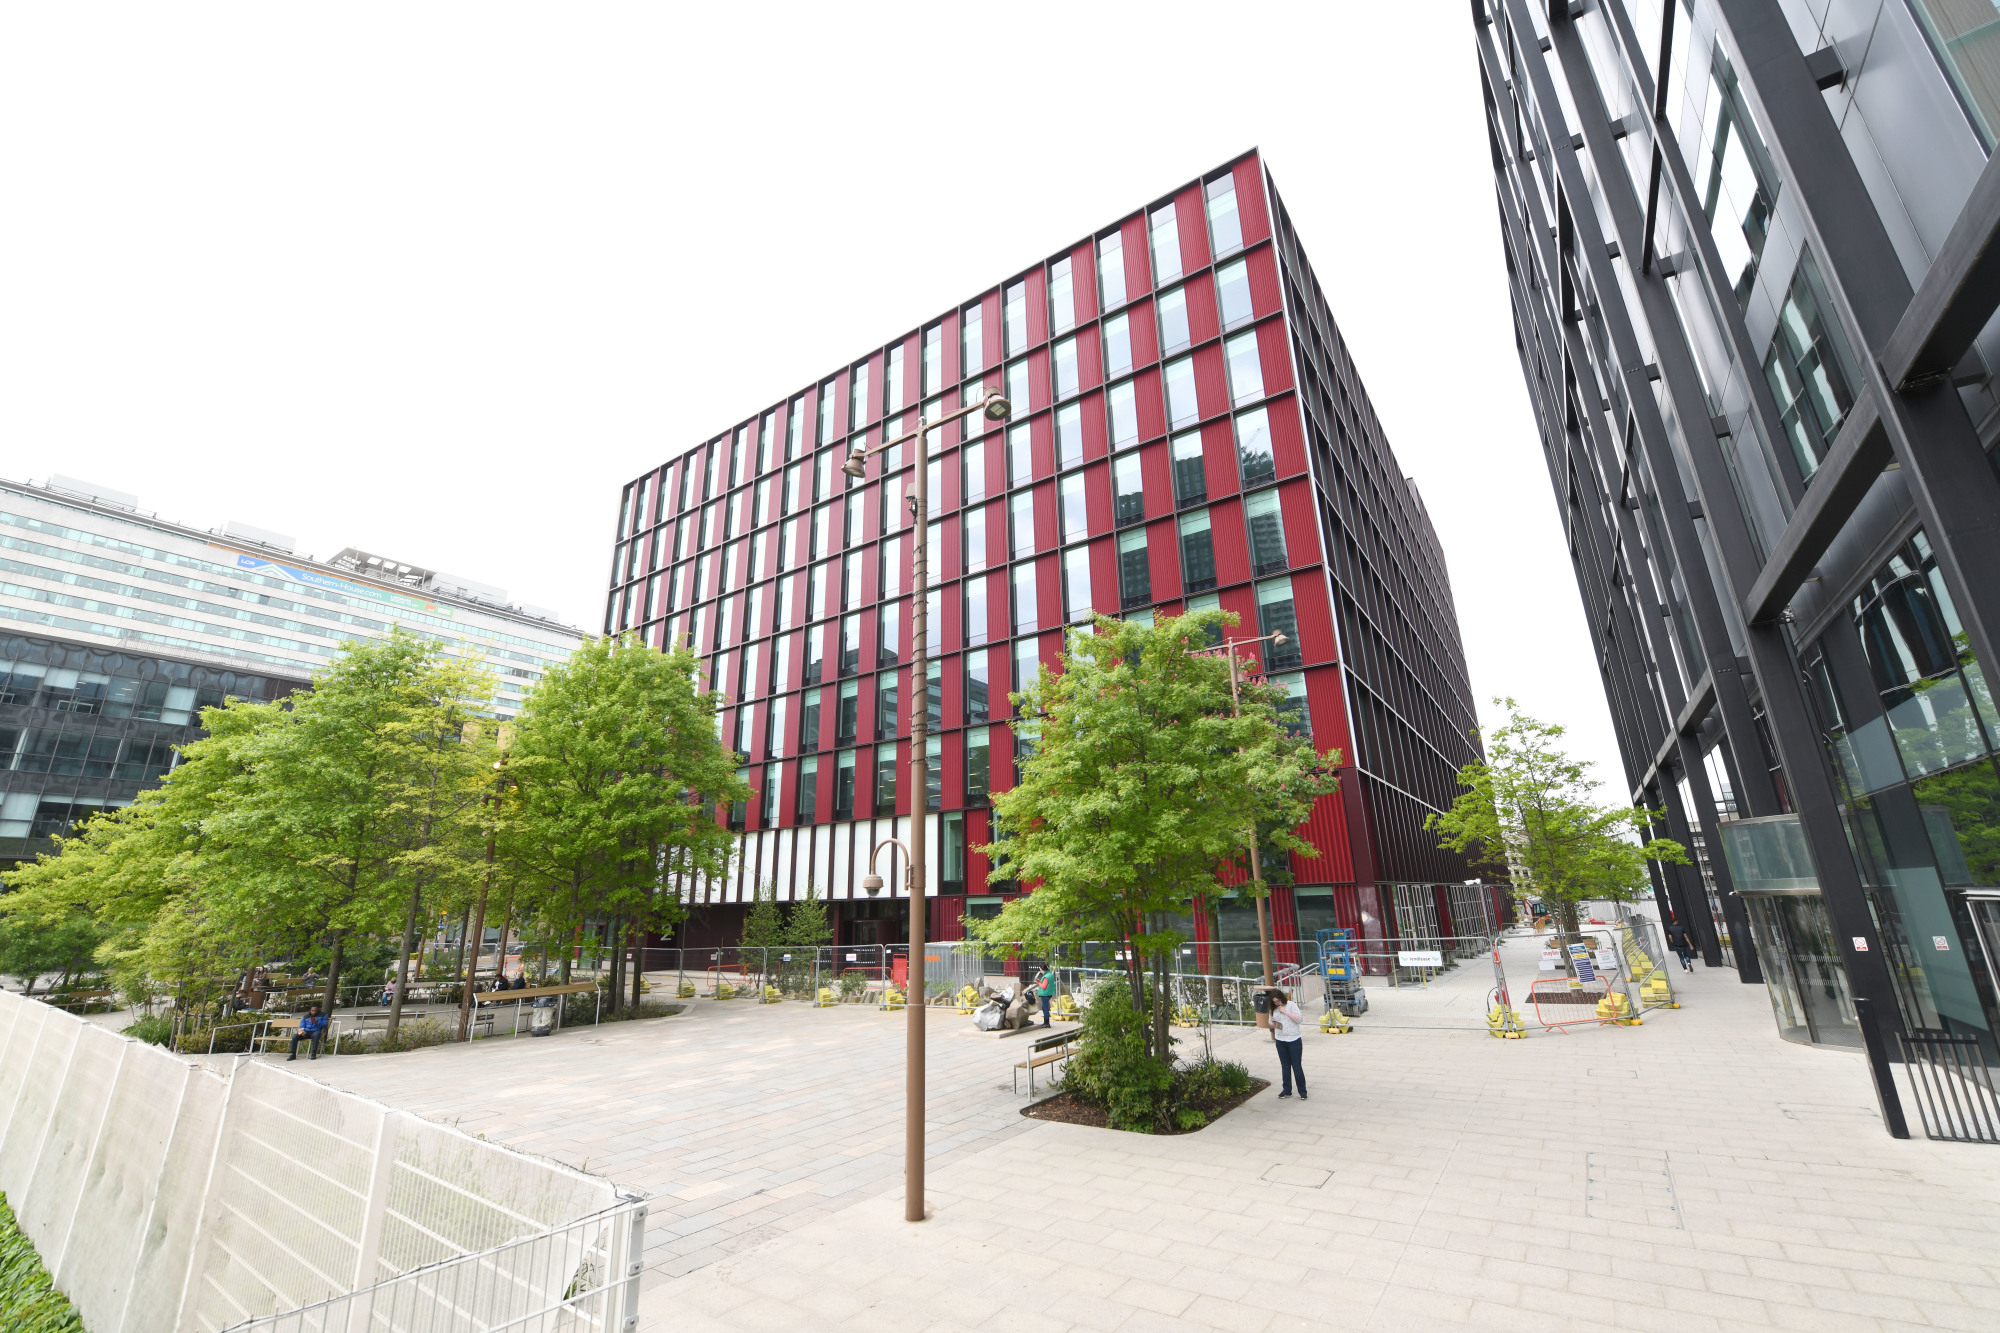 Government Property Agency Completes 2 Ruskin Square in Croydon